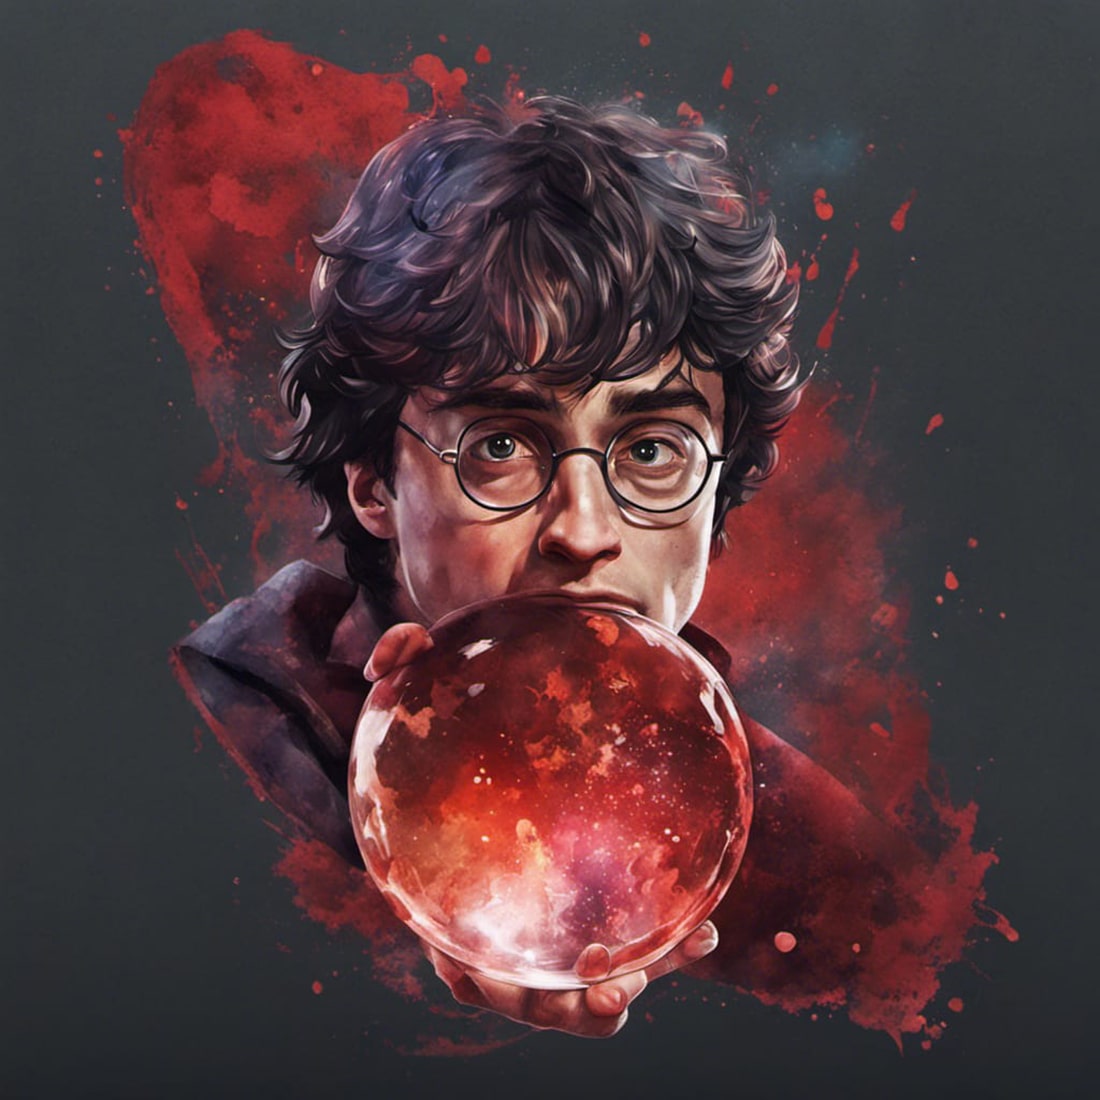 Harry potter casting a spell cover image.